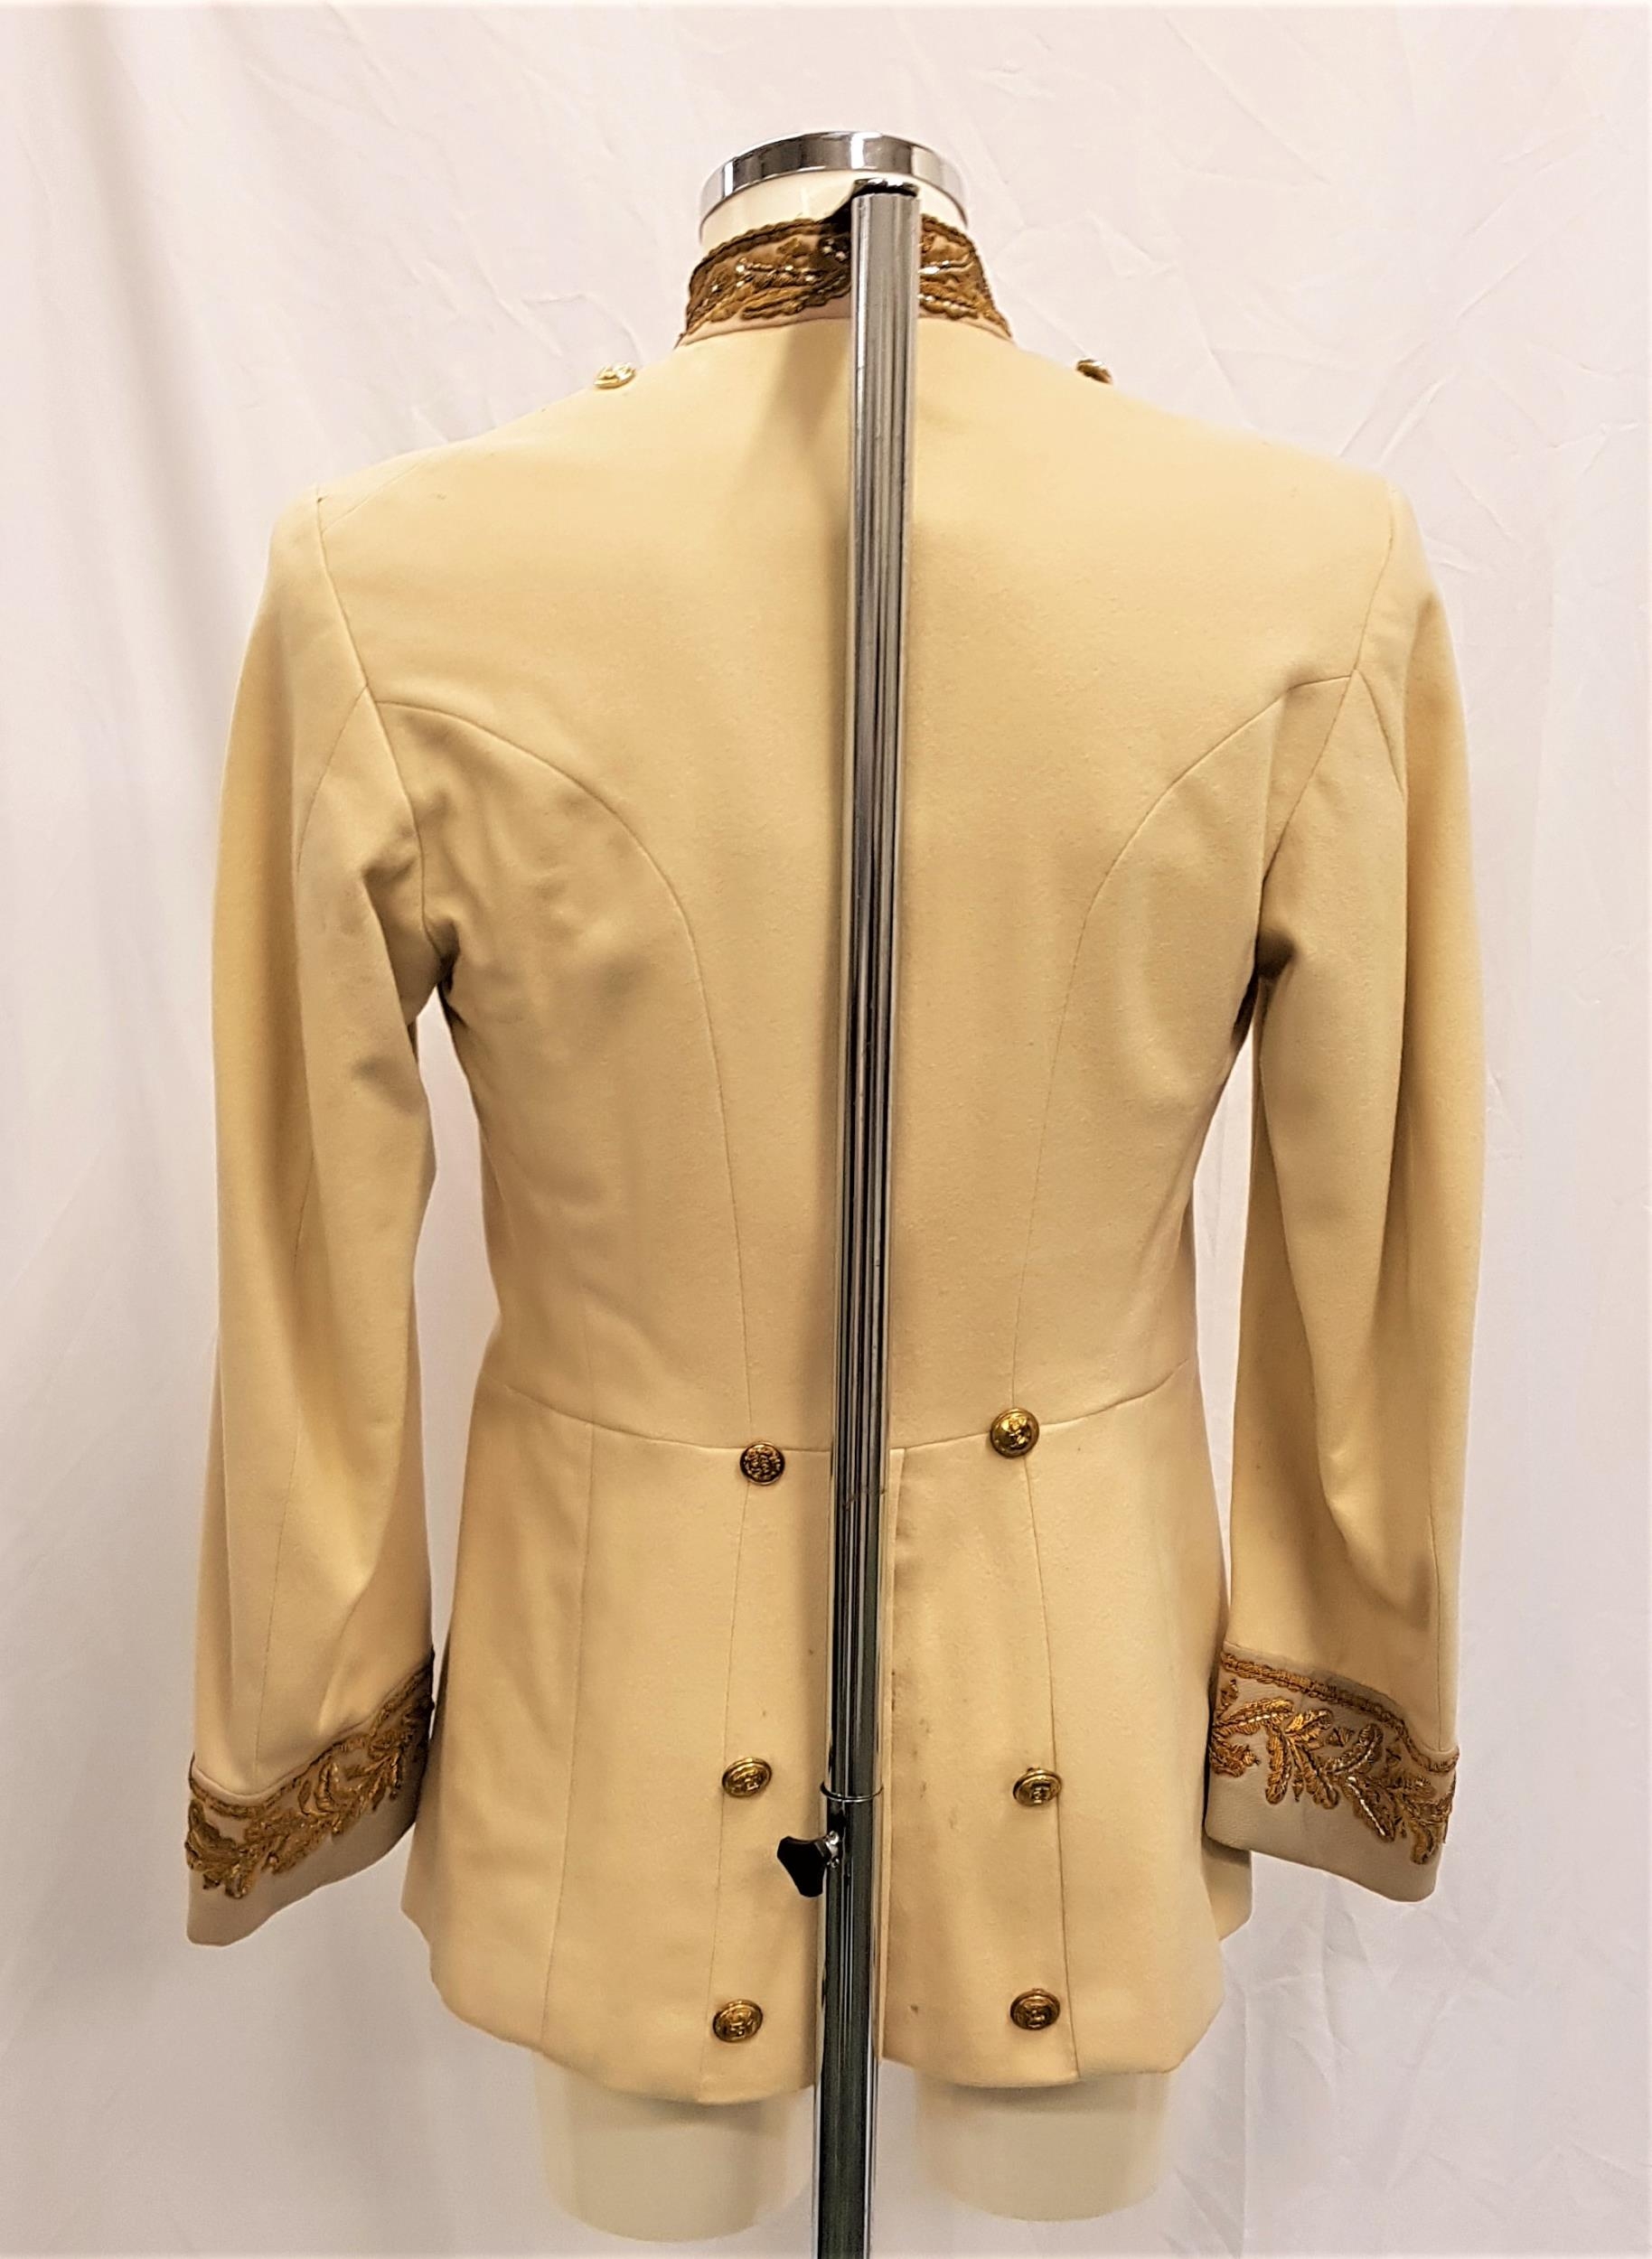 THE PRISONER OF ZENDA (1979) - SYD FREWIN'S JACKET - PLAYED BY PETER SELLERS Custom made cream - Image 2 of 4